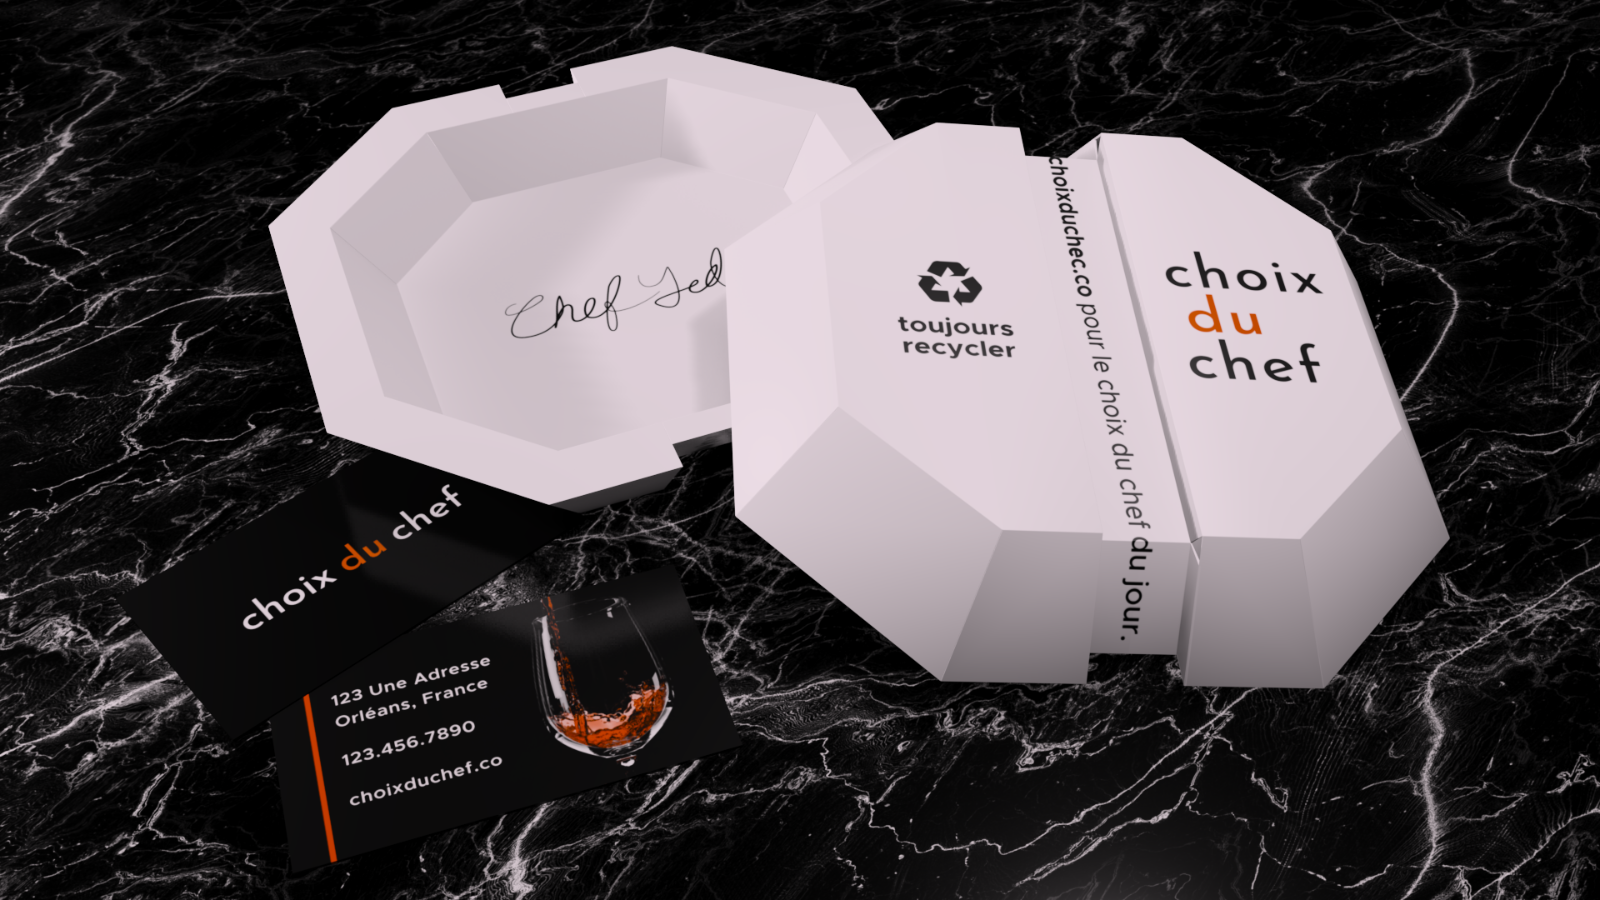 Takeout box and business cards with Choix du Chef logo on them